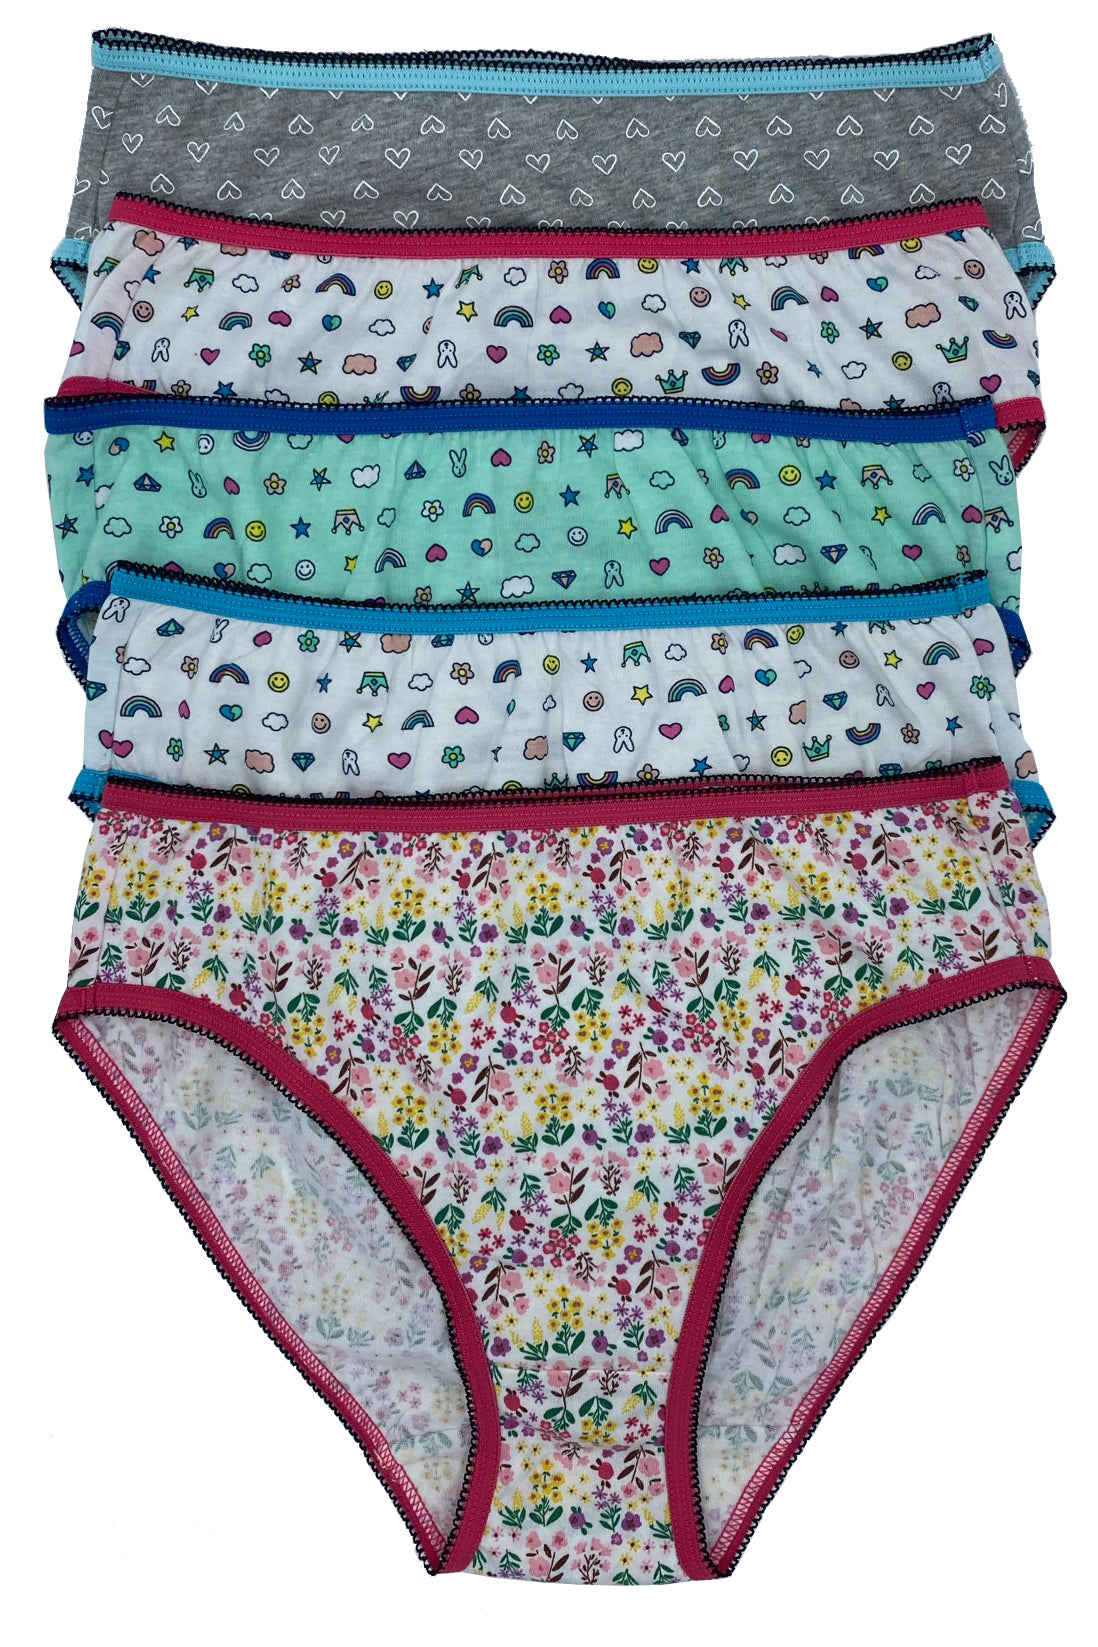 Cotton Hi-Cut Underwear for Girls in Assorted Colors